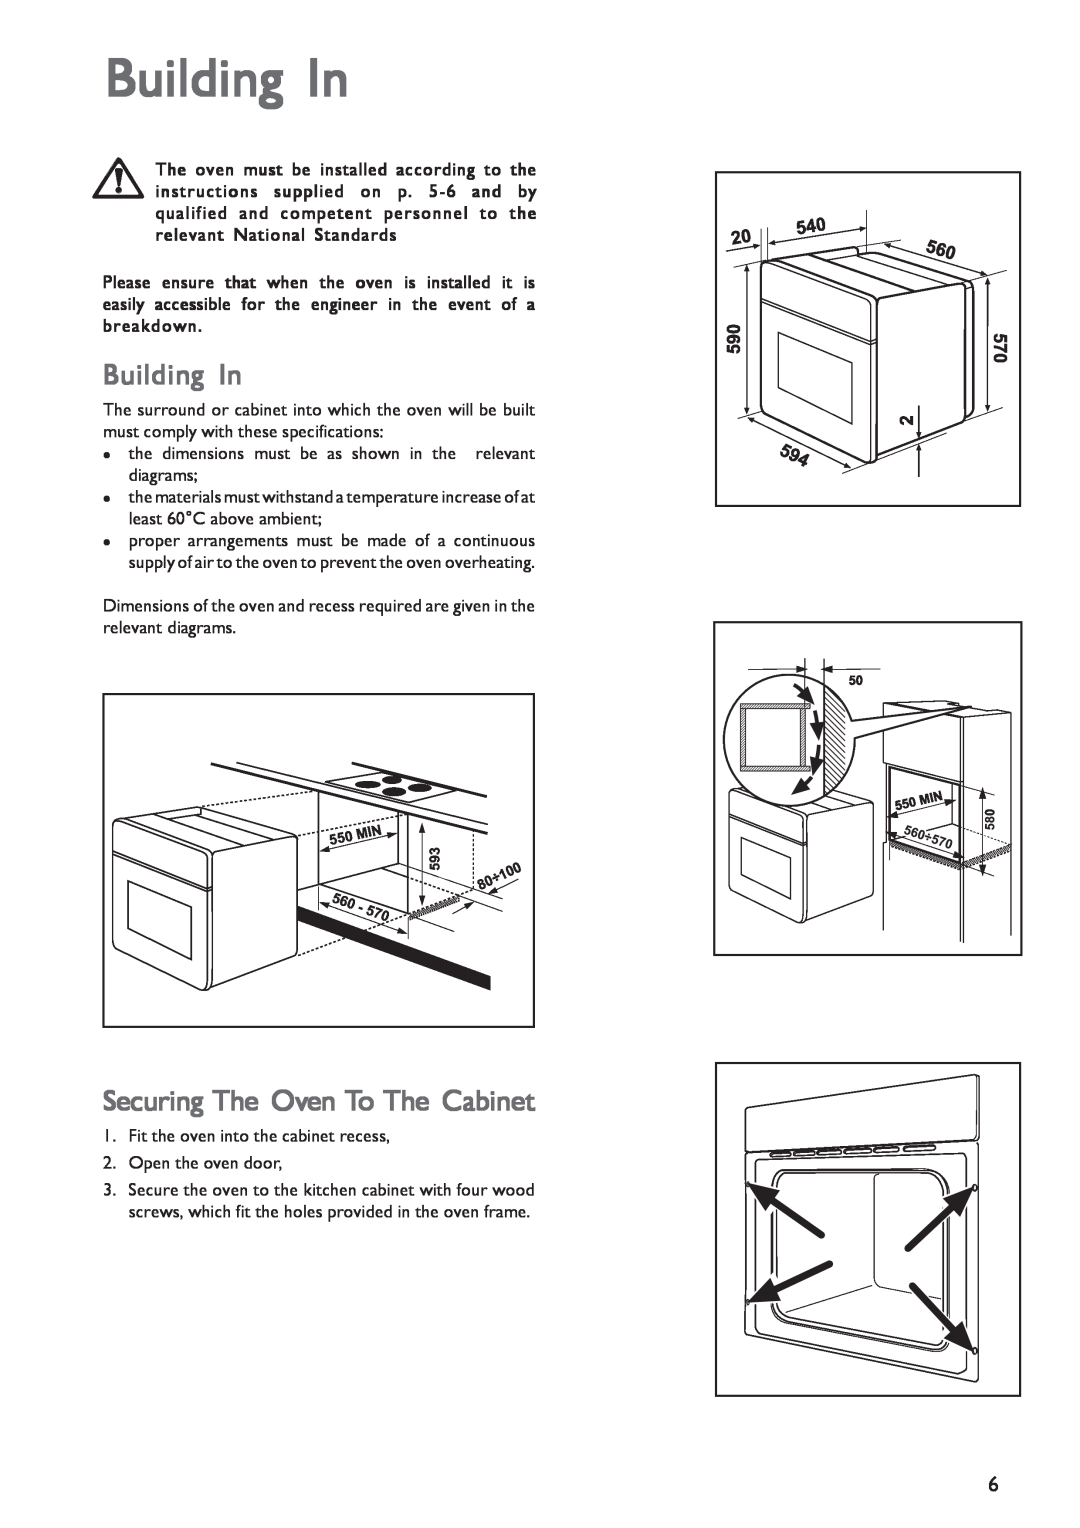 John Lewis JLBIOS601 instruction manual Building In, Securing The Oven To The Cabinet 